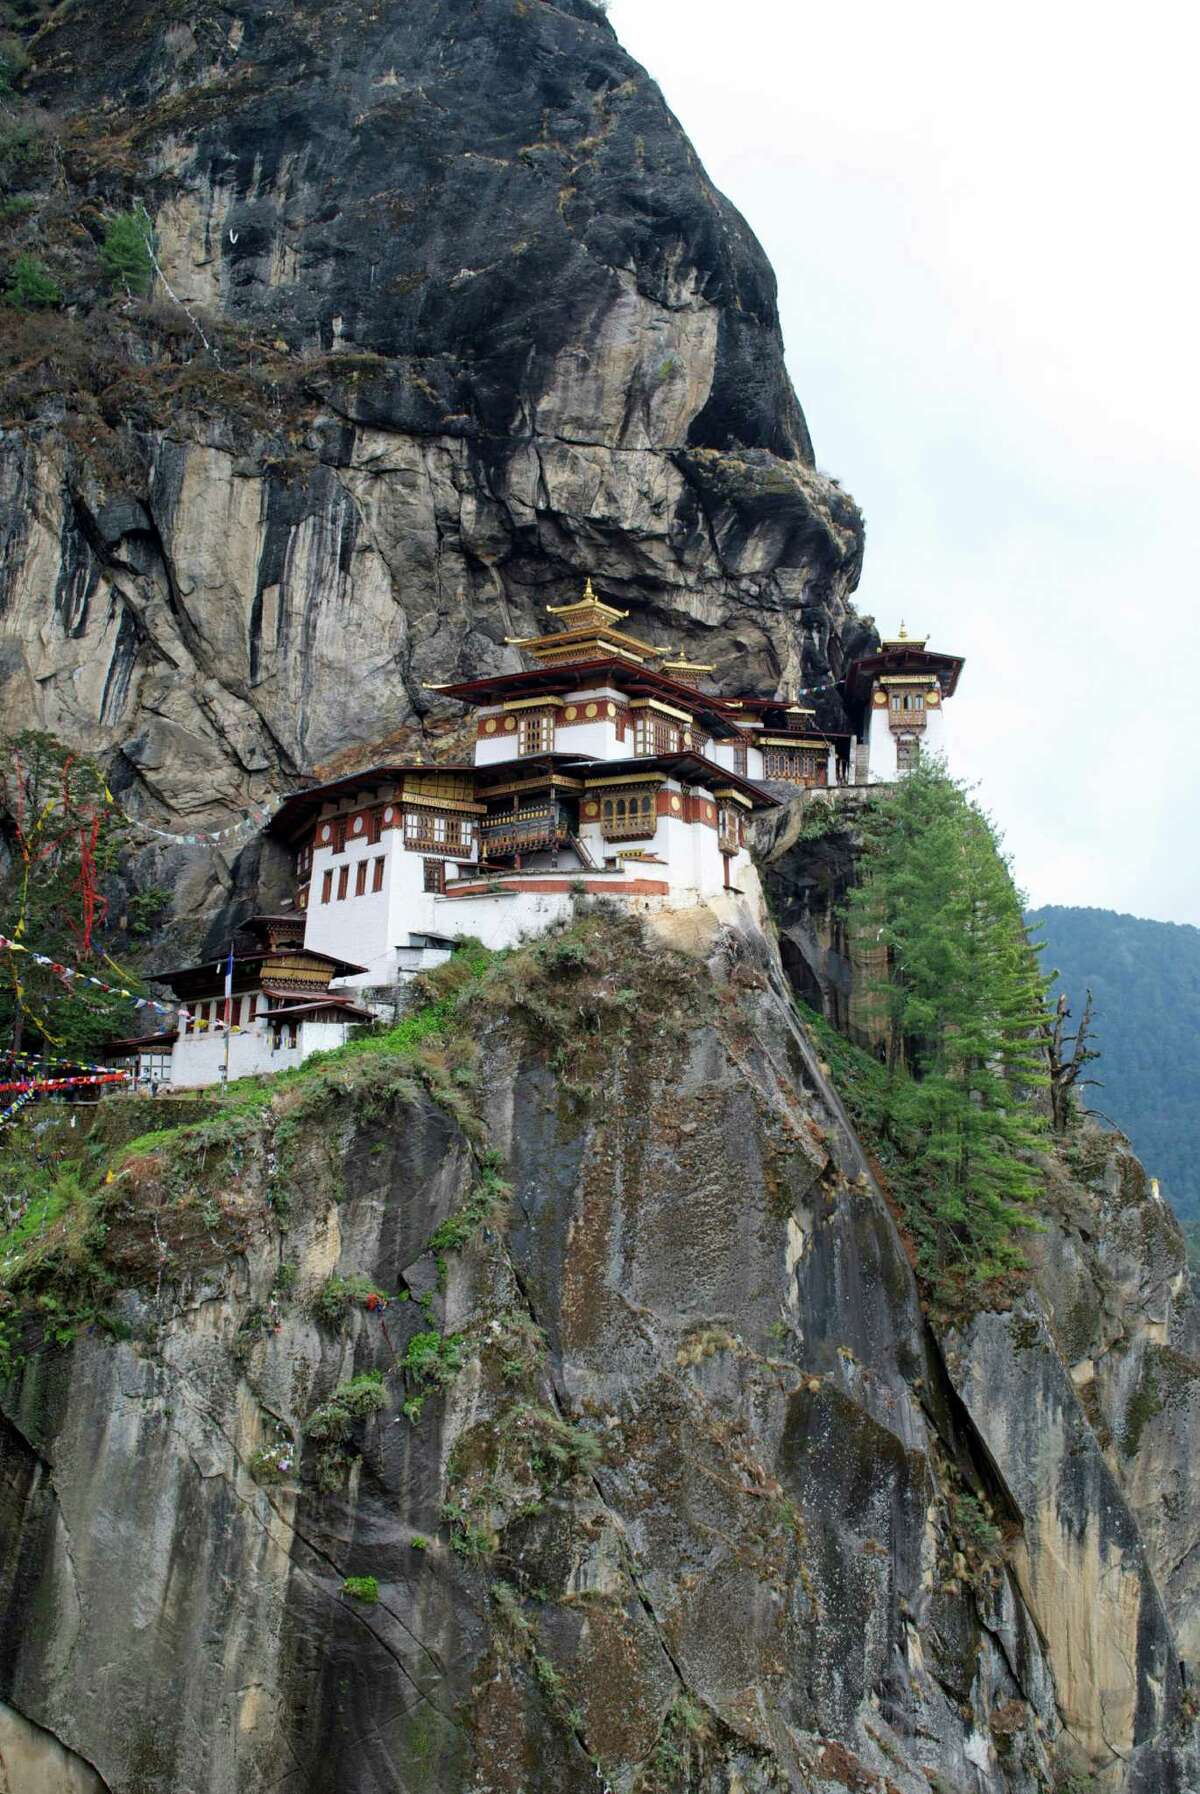 ﻿It's a 6-mile hike to reach Tiger's Nest Monastery, a holy site in Bhutan associated with the Buddhist saint Guru Rinpoche, who meditated in a cliffside cave.